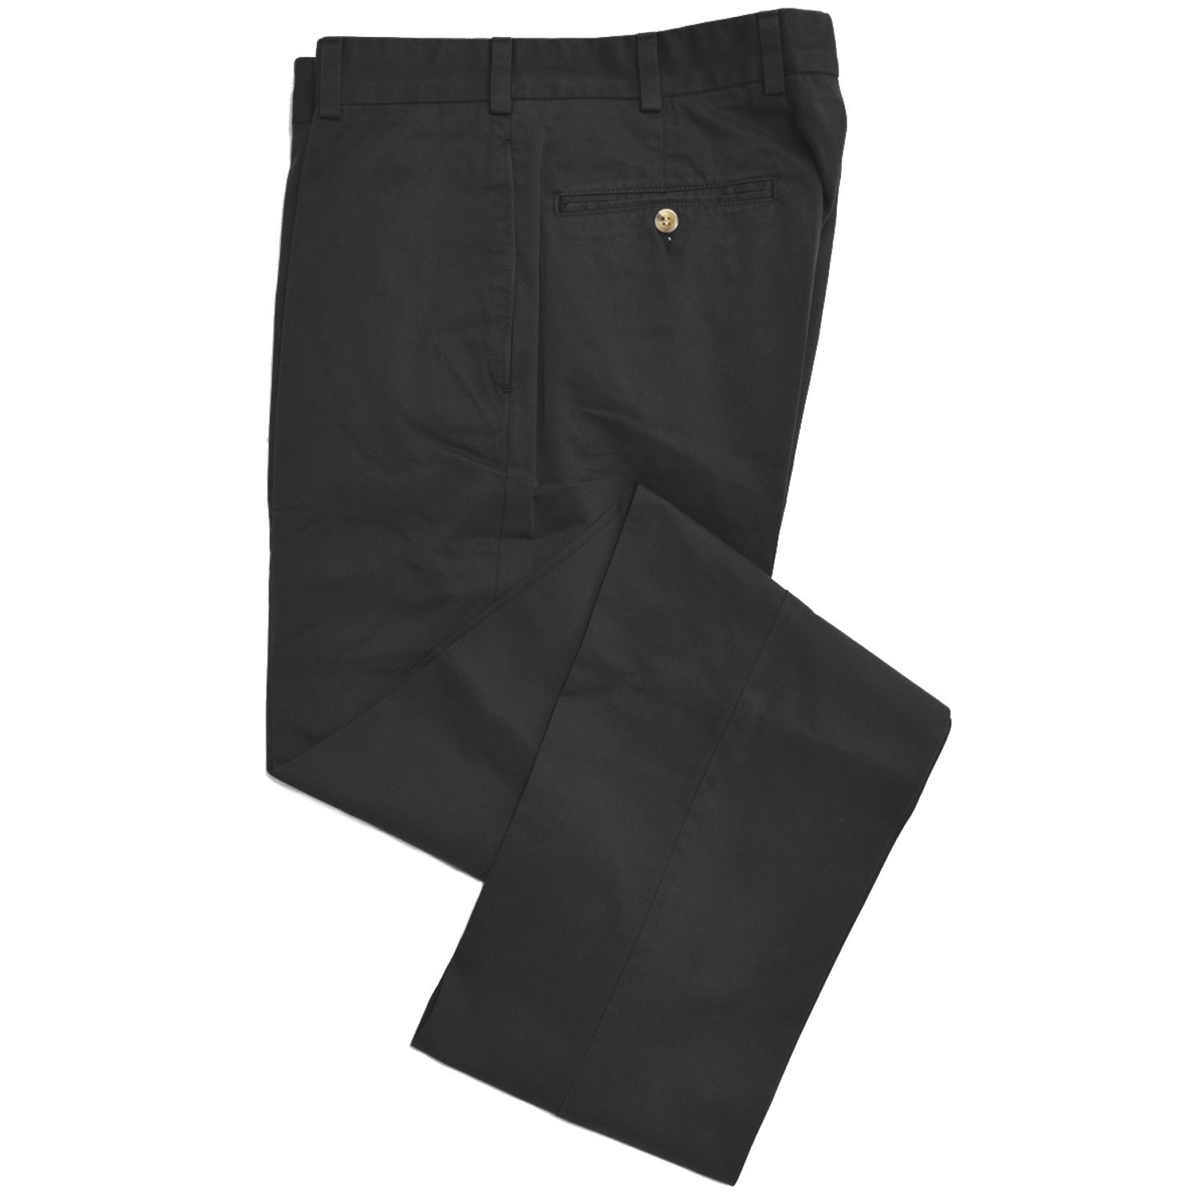 Chamois Cloth Pant - Model F2 Standard Fit Plain Front in Black by